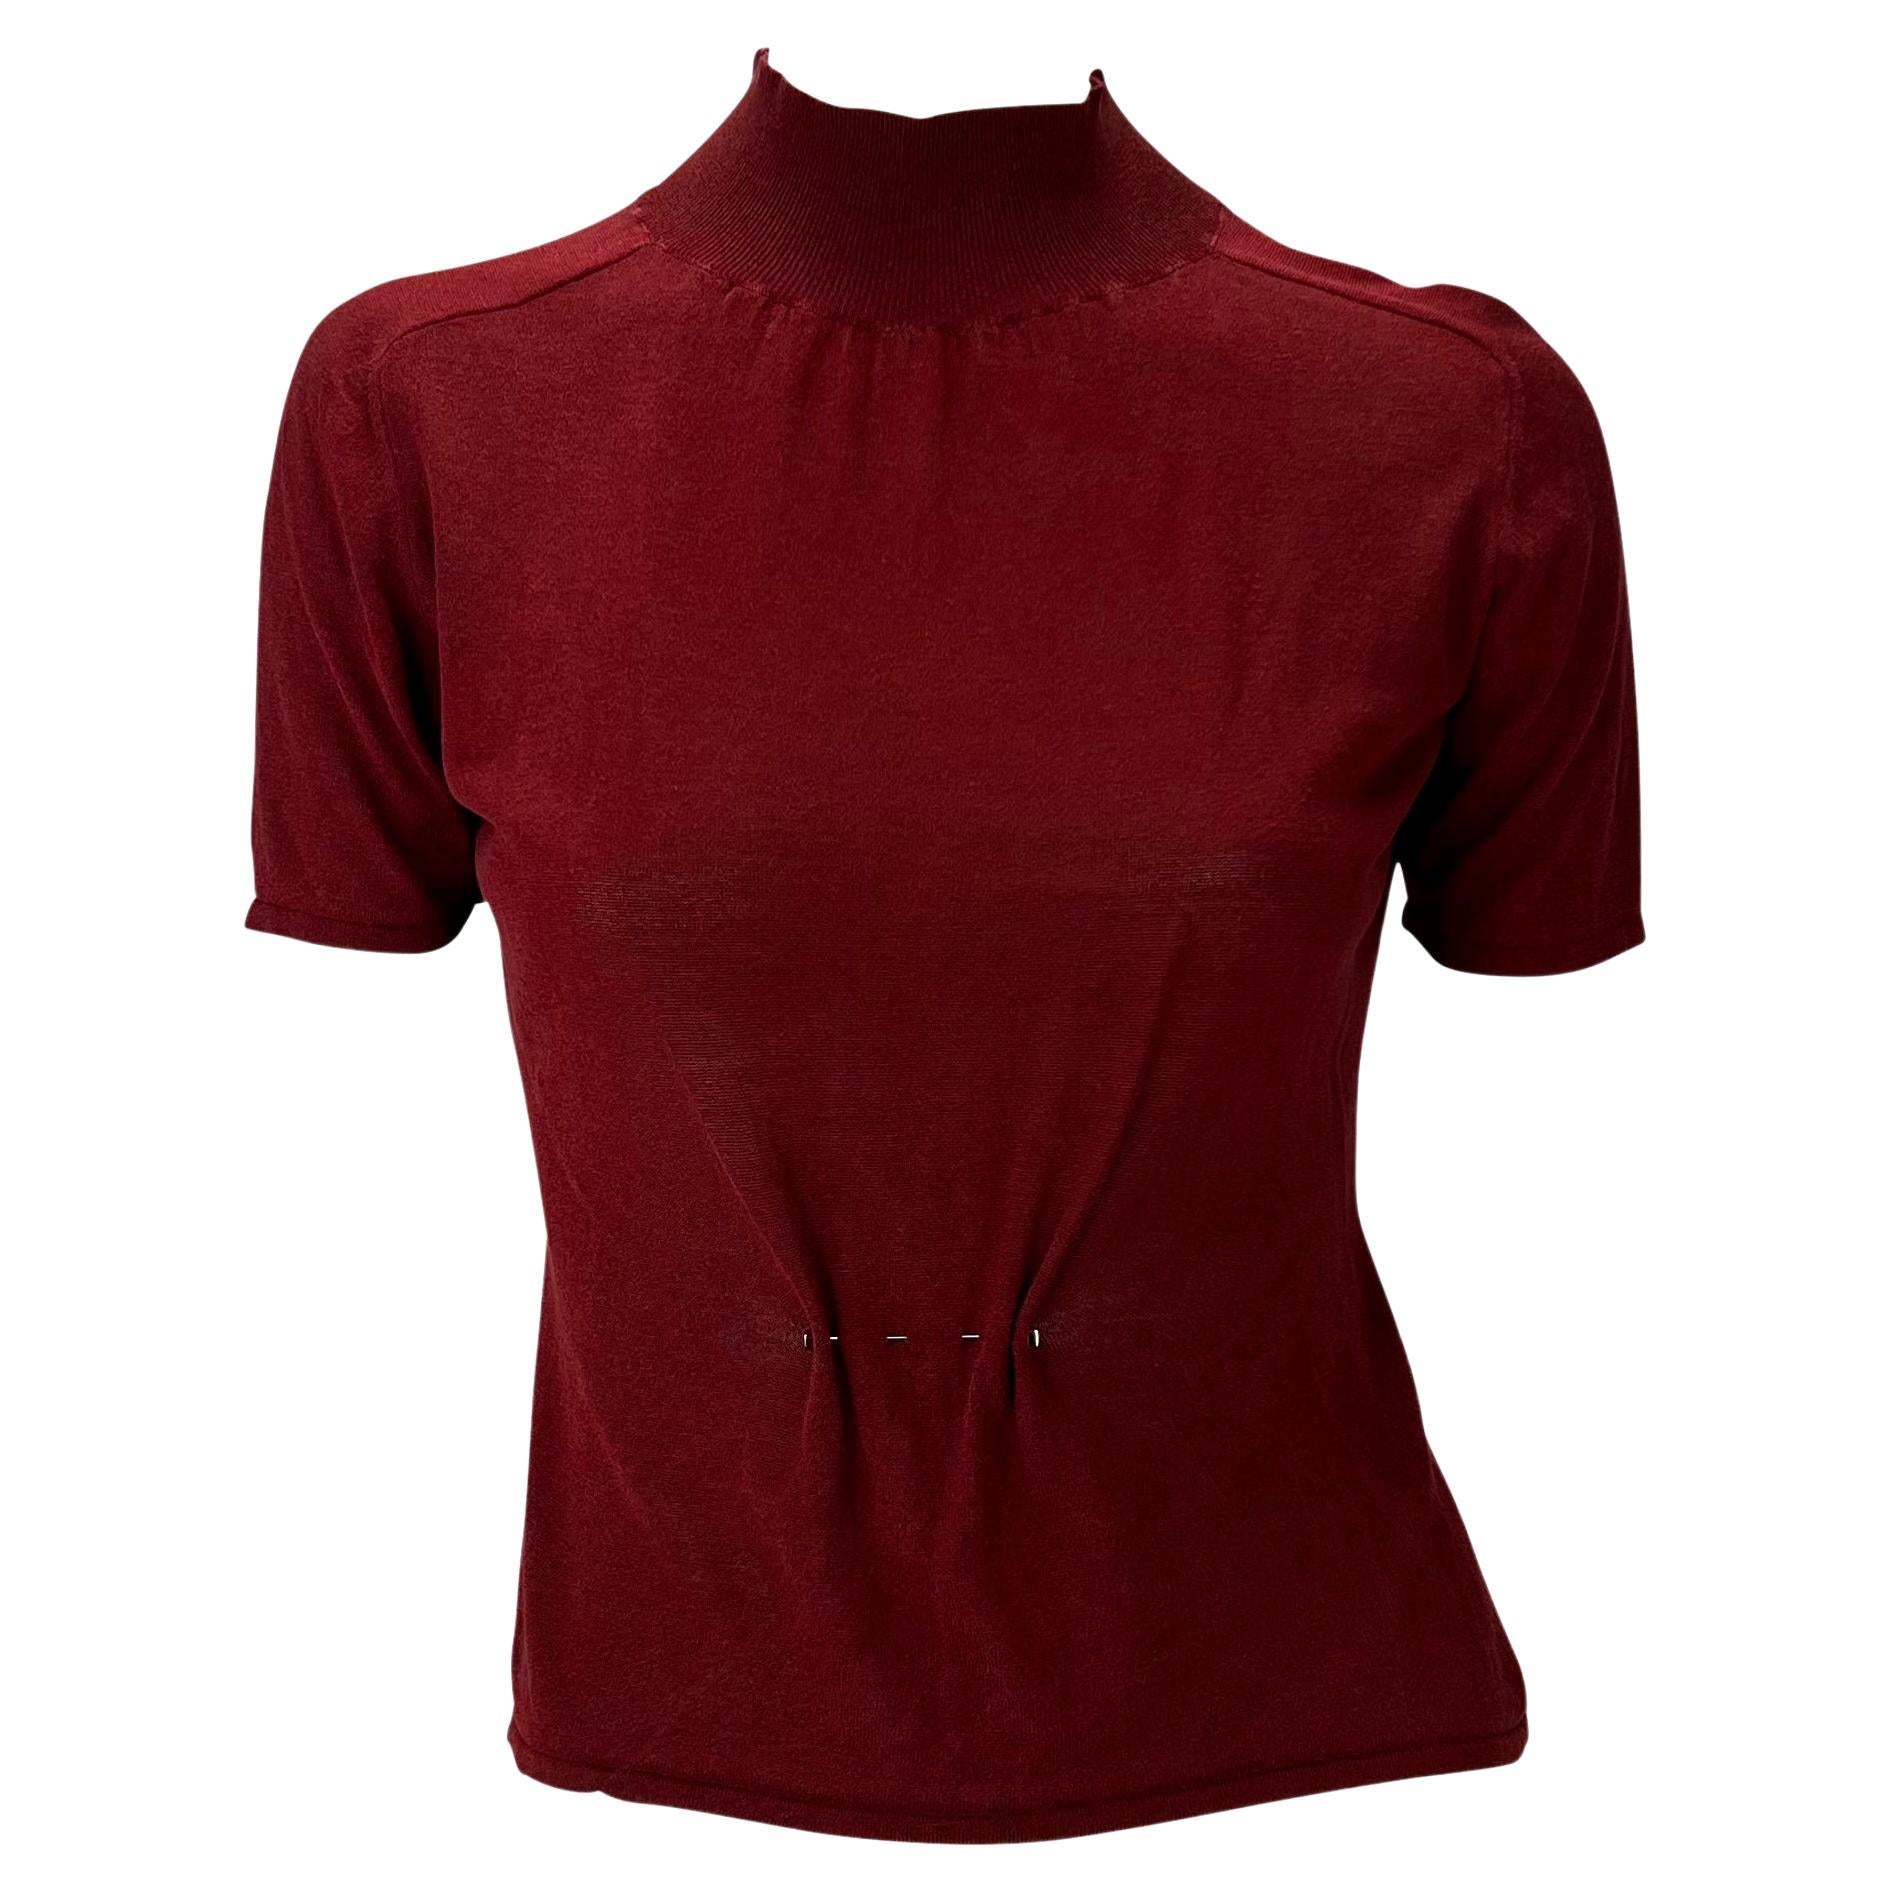 F/W 1999 Gucci by Tom Ford Runway G Pin Sheer Mock Neck Top Maroon For Sale